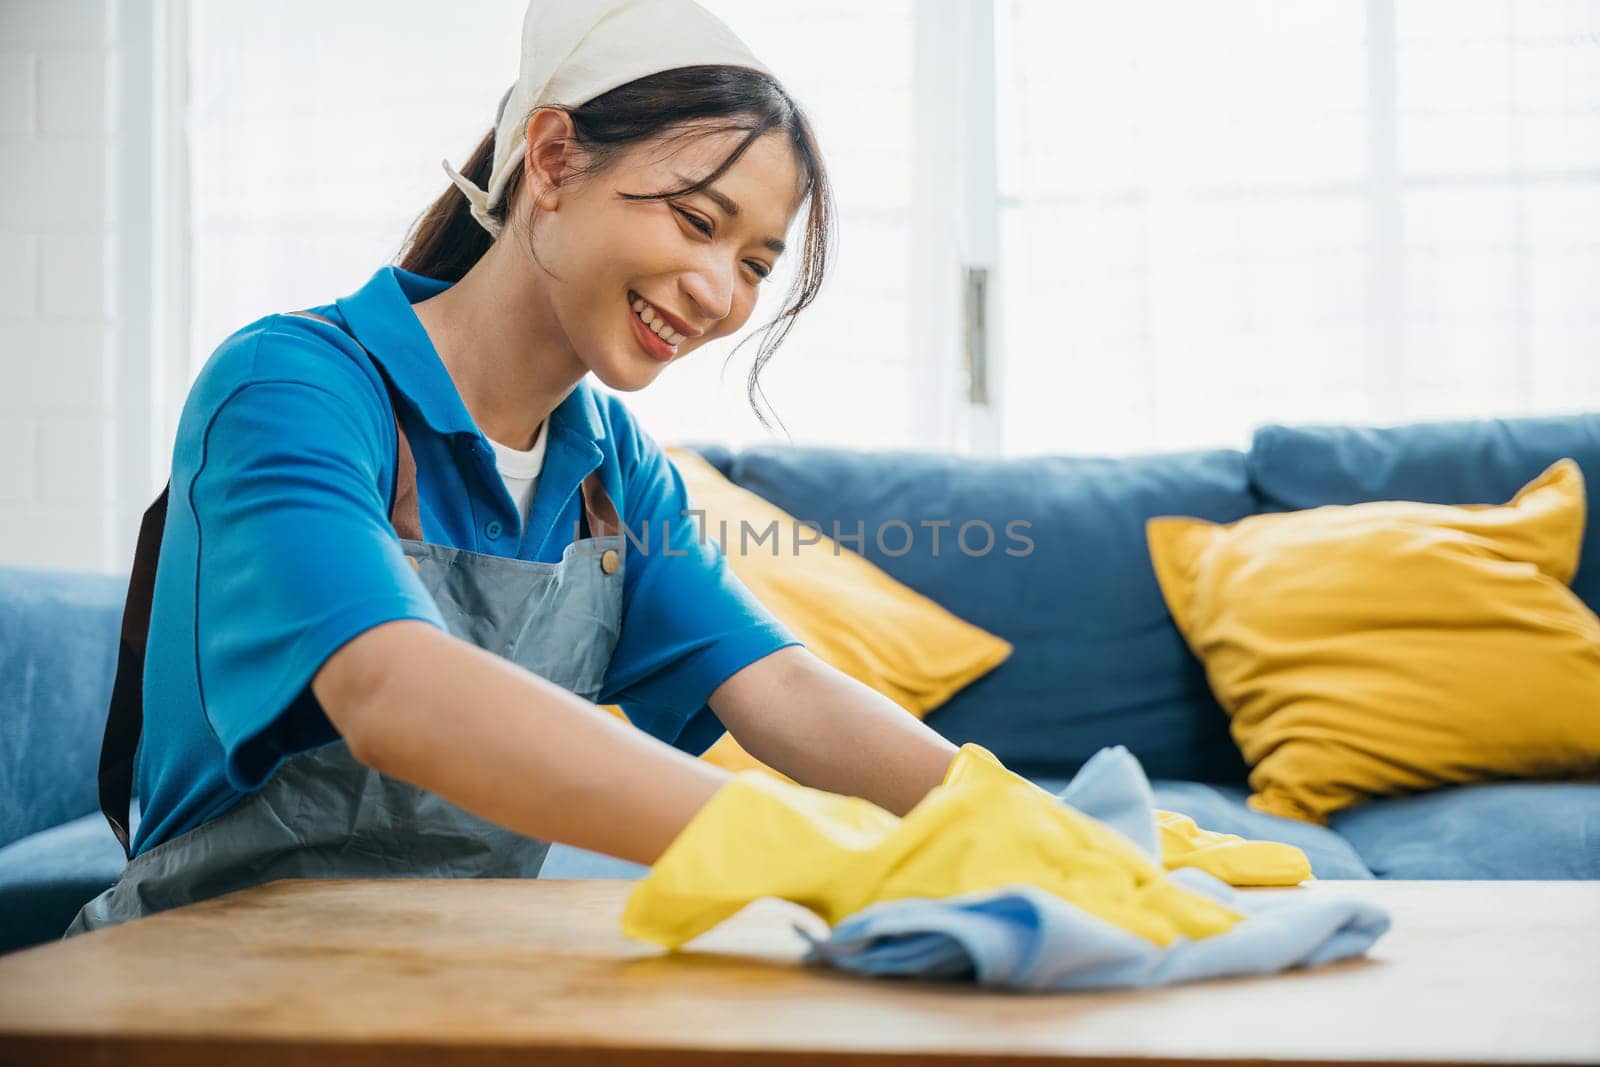 A happy young woman wearing yellow gloves wipes and cleans the table in her living room. Engaged in housework she ensures hygiene and safety showing dedication to home cleaning. maid clean desk. by Sorapop